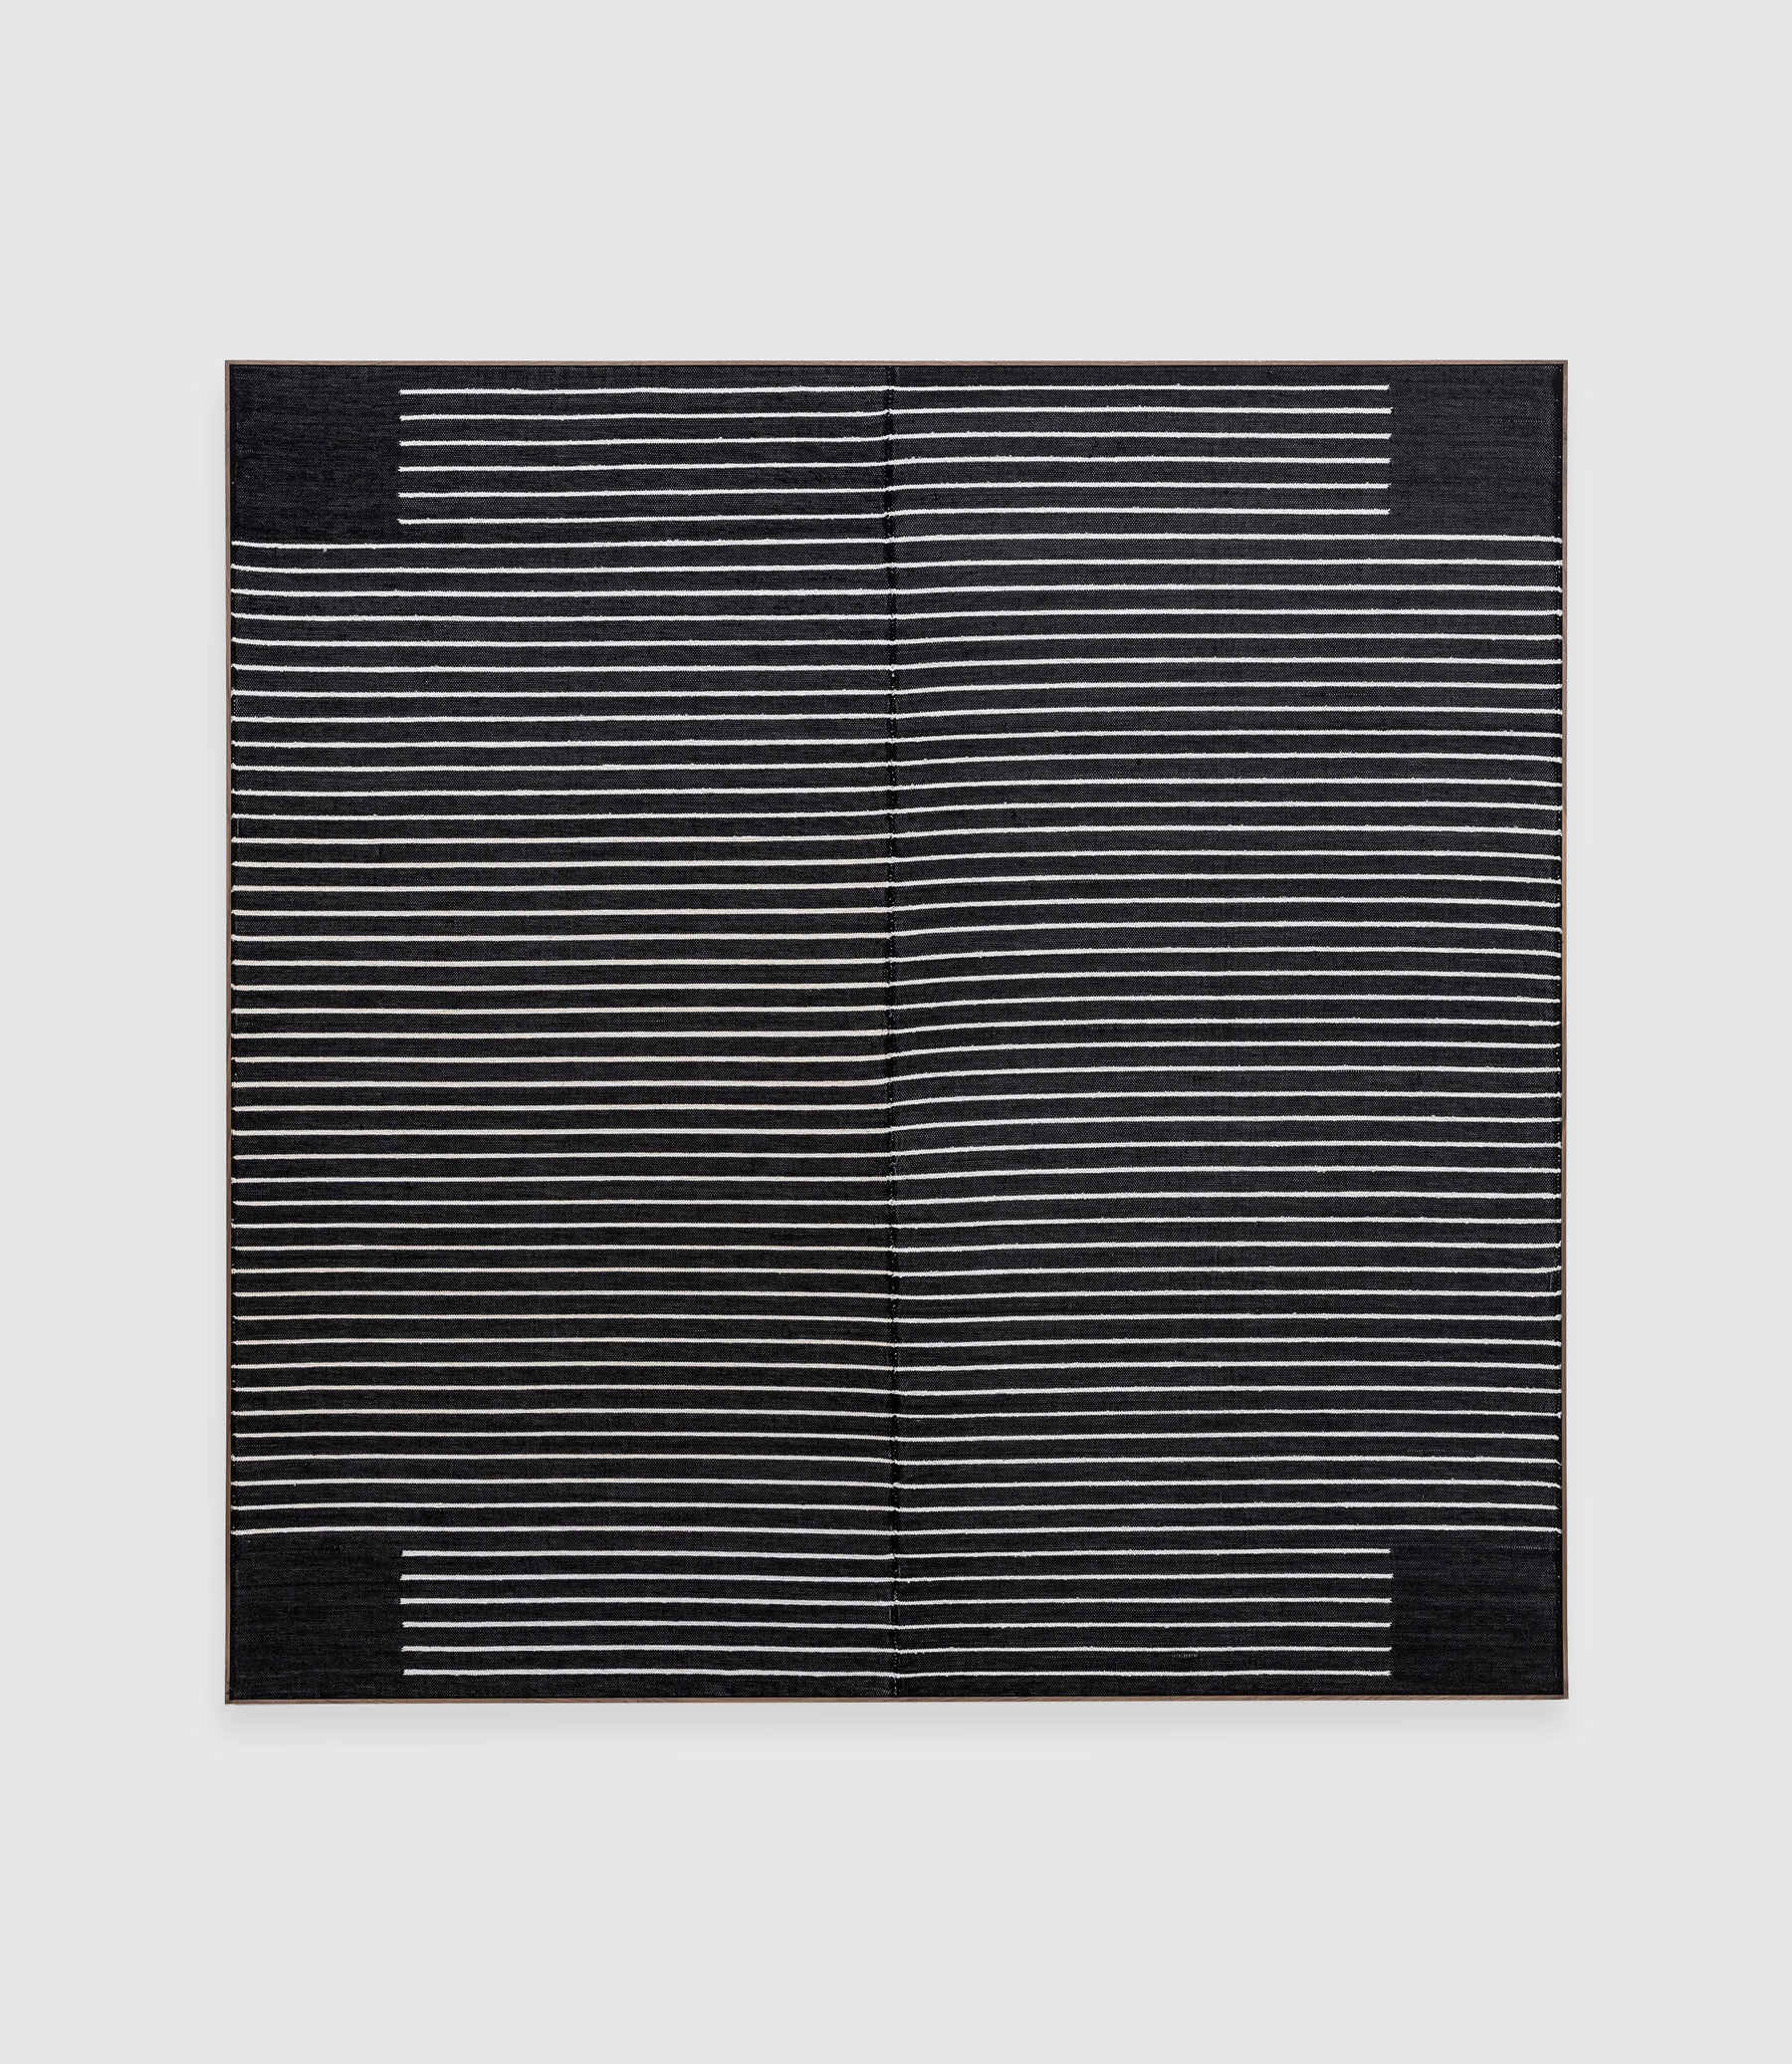 Brent Wadden, Untitled, 2018, handwoven fibers, wool, cotton and acrylic on canvas, 232 cm × 232 cm × 4 cm © Brent Wadden via Pace Gallery